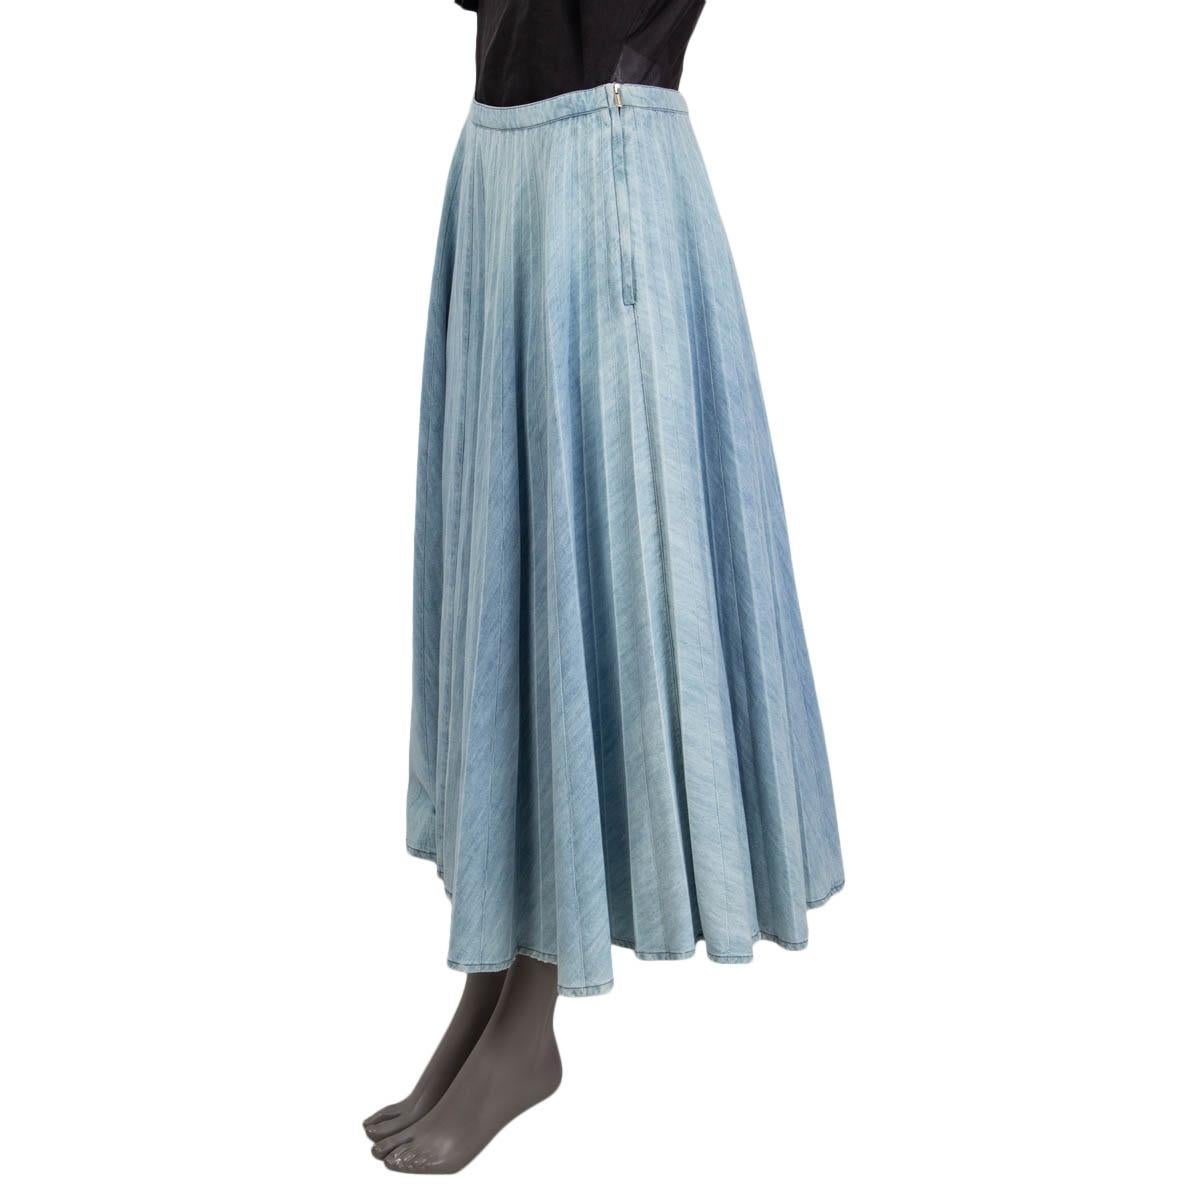 100% authentic Miu Miu pleated denim skirt in washed out light blue cotton (100%). Features a distressed hemline and a black 'Miu Miu' patch on the back. Opens with a concealed zipper and a button on the side. Unlined. Has been worn and is in